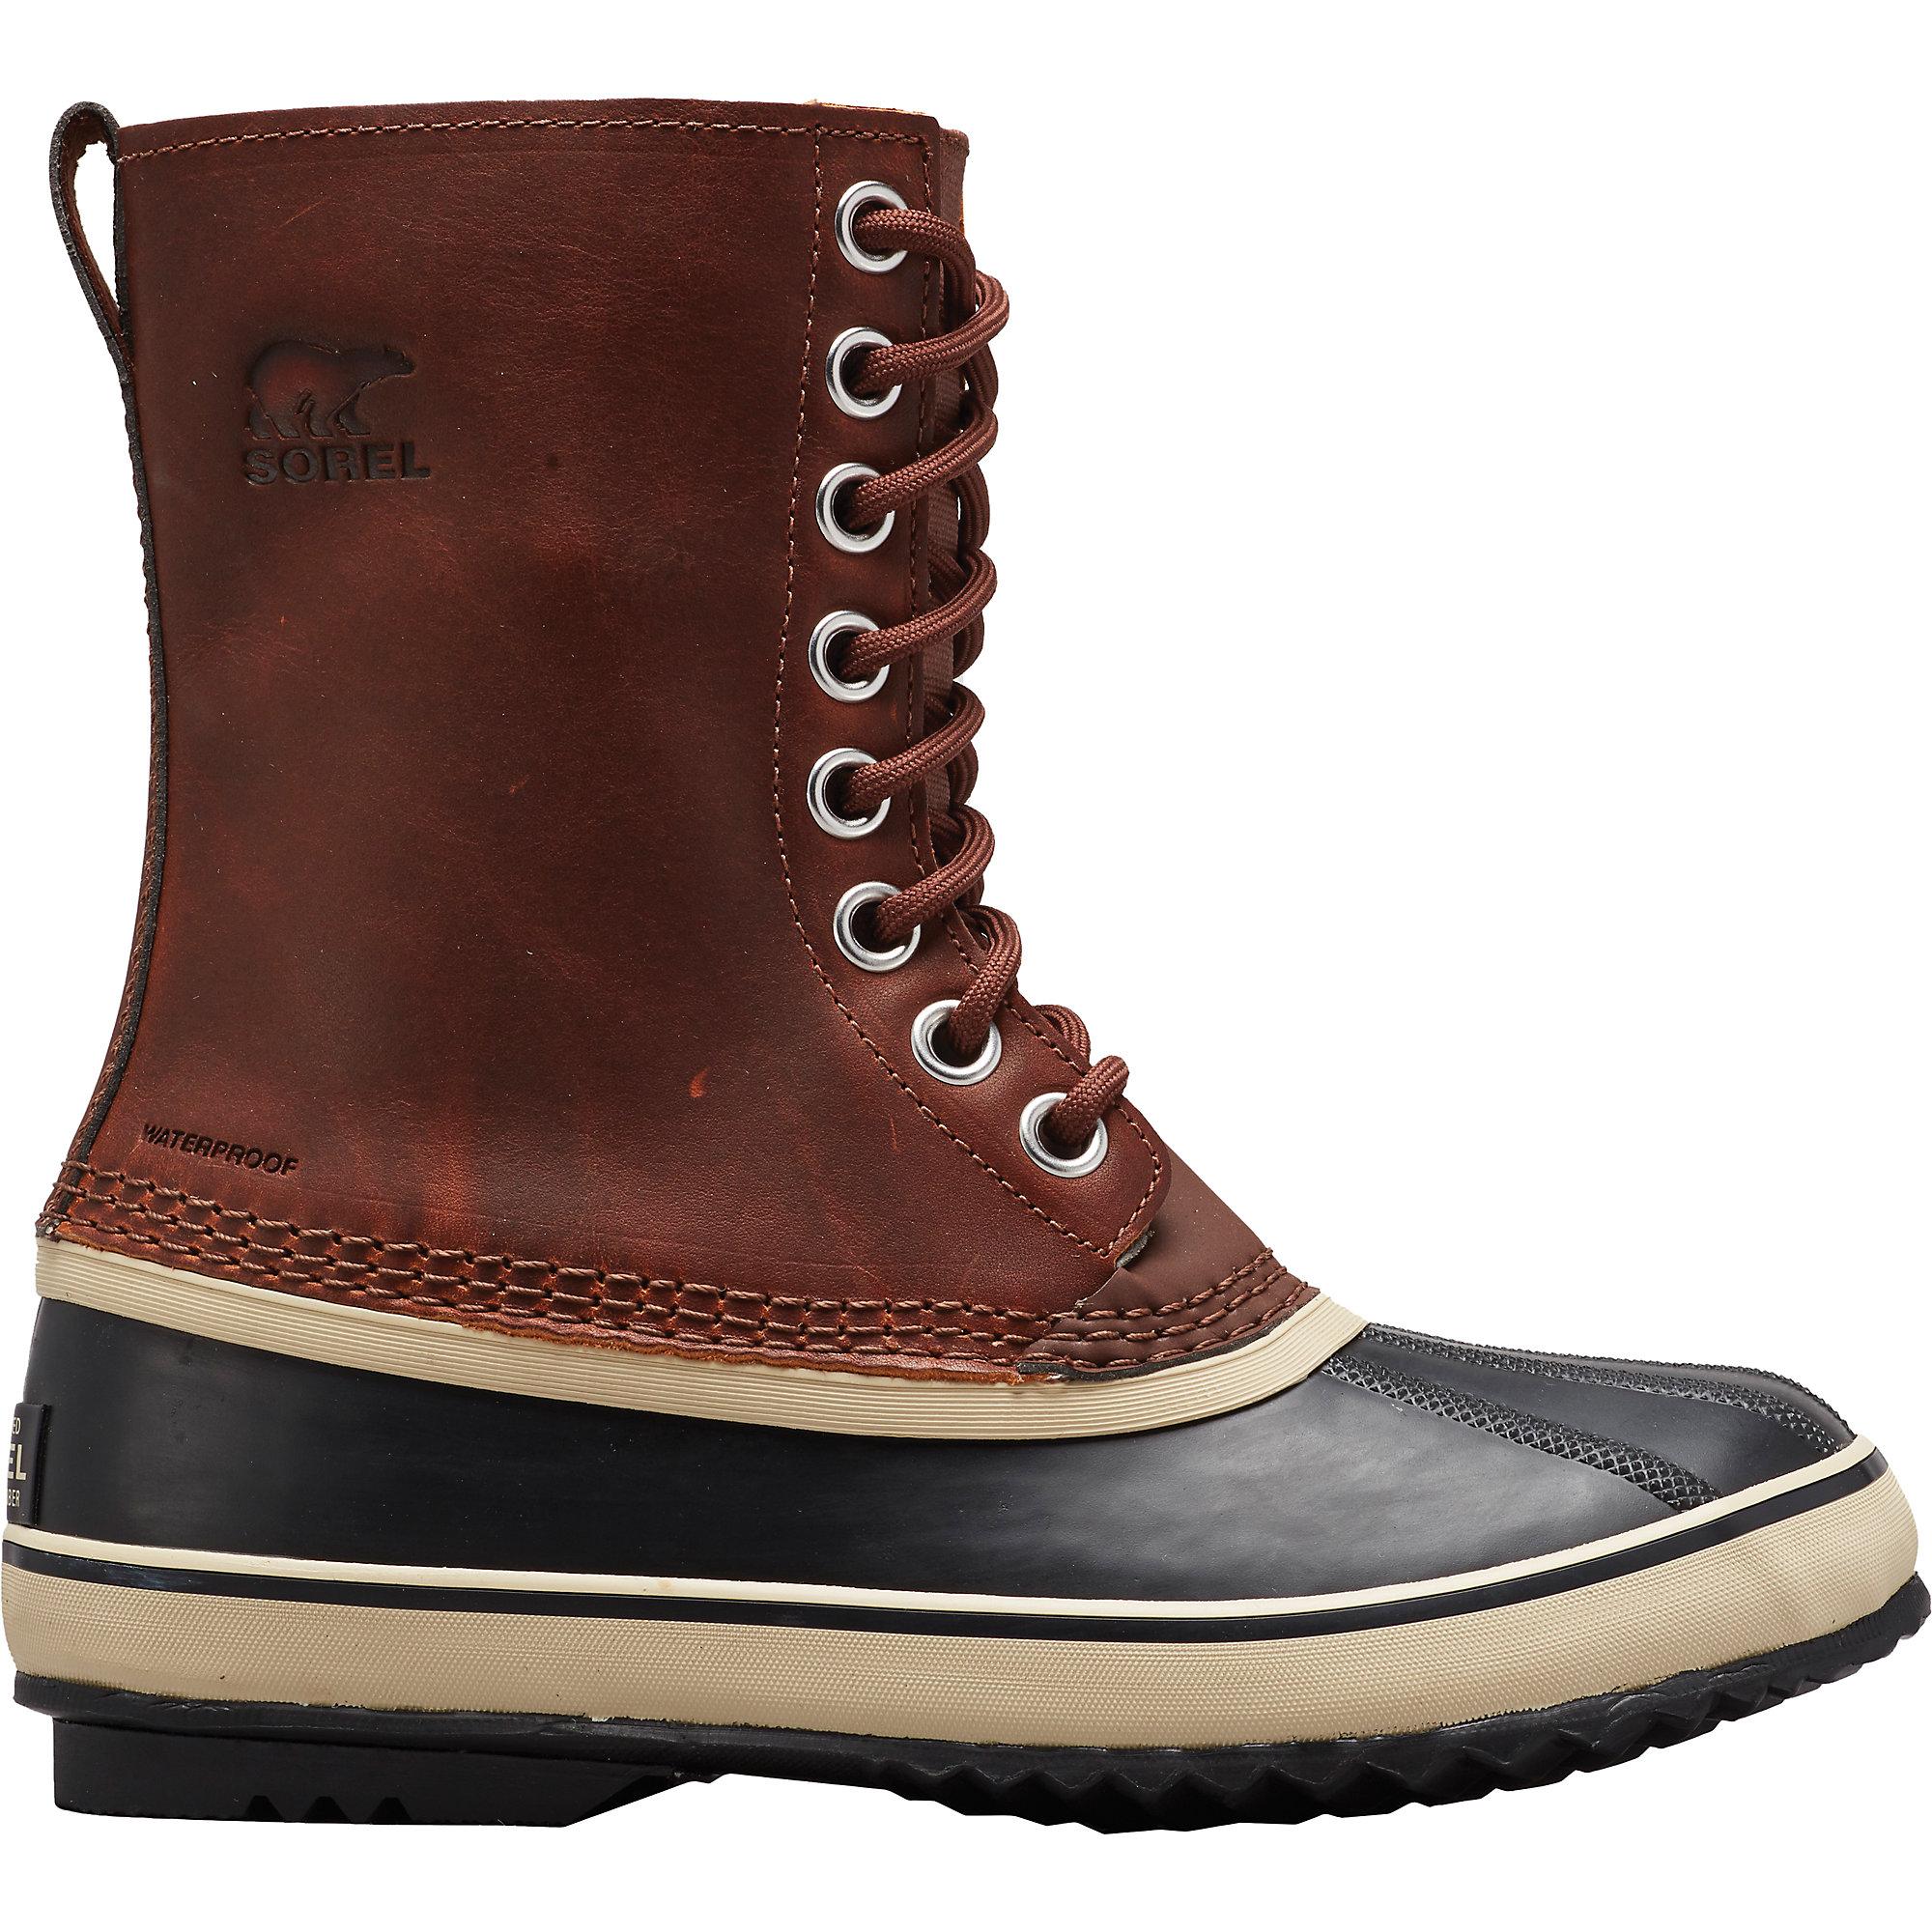 Sorel 1964 Premium Leather Boot in Brown - Save 31% - Lyst